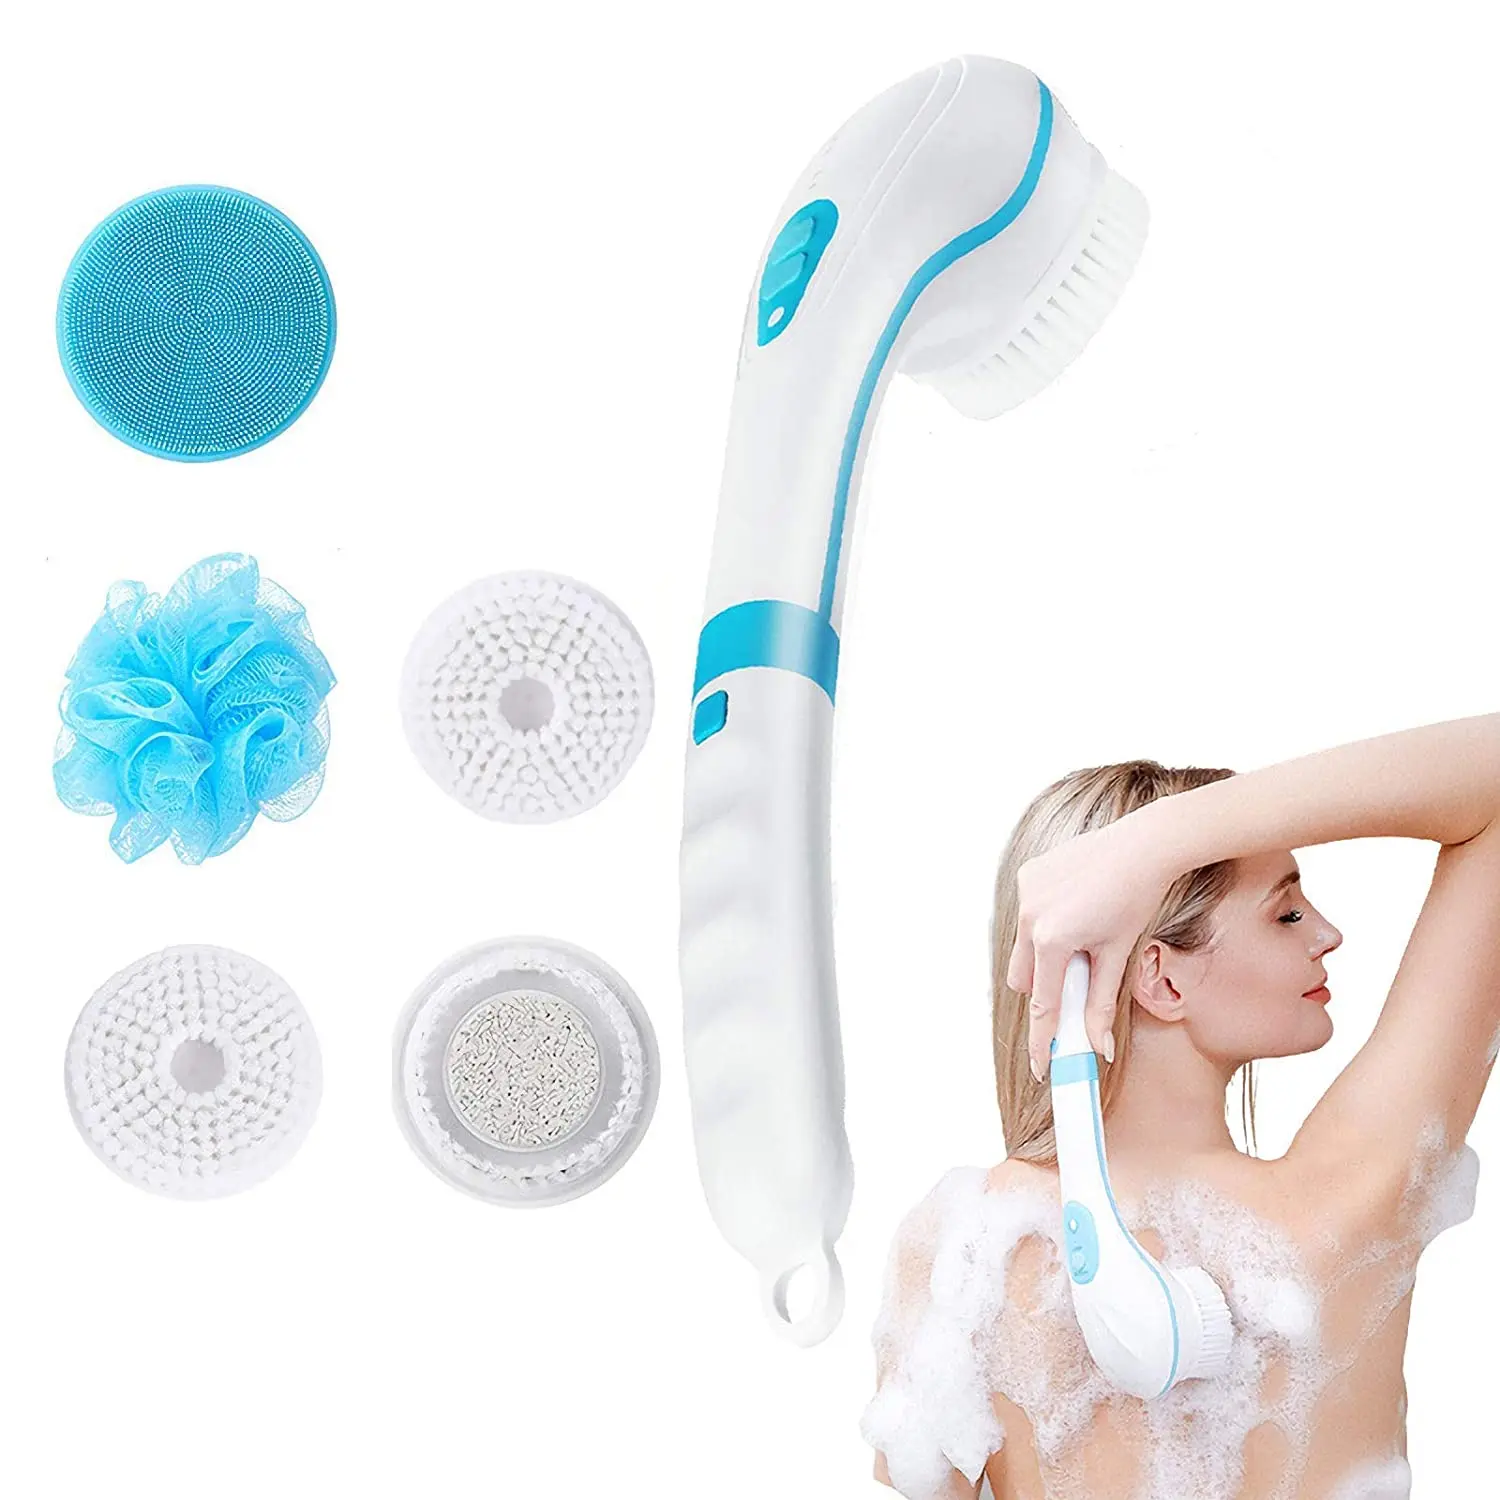 

Kingworth Long Handle Cleaning Electric Spa Massage Shower Brush Baby Electric Bath Brush, Customized color